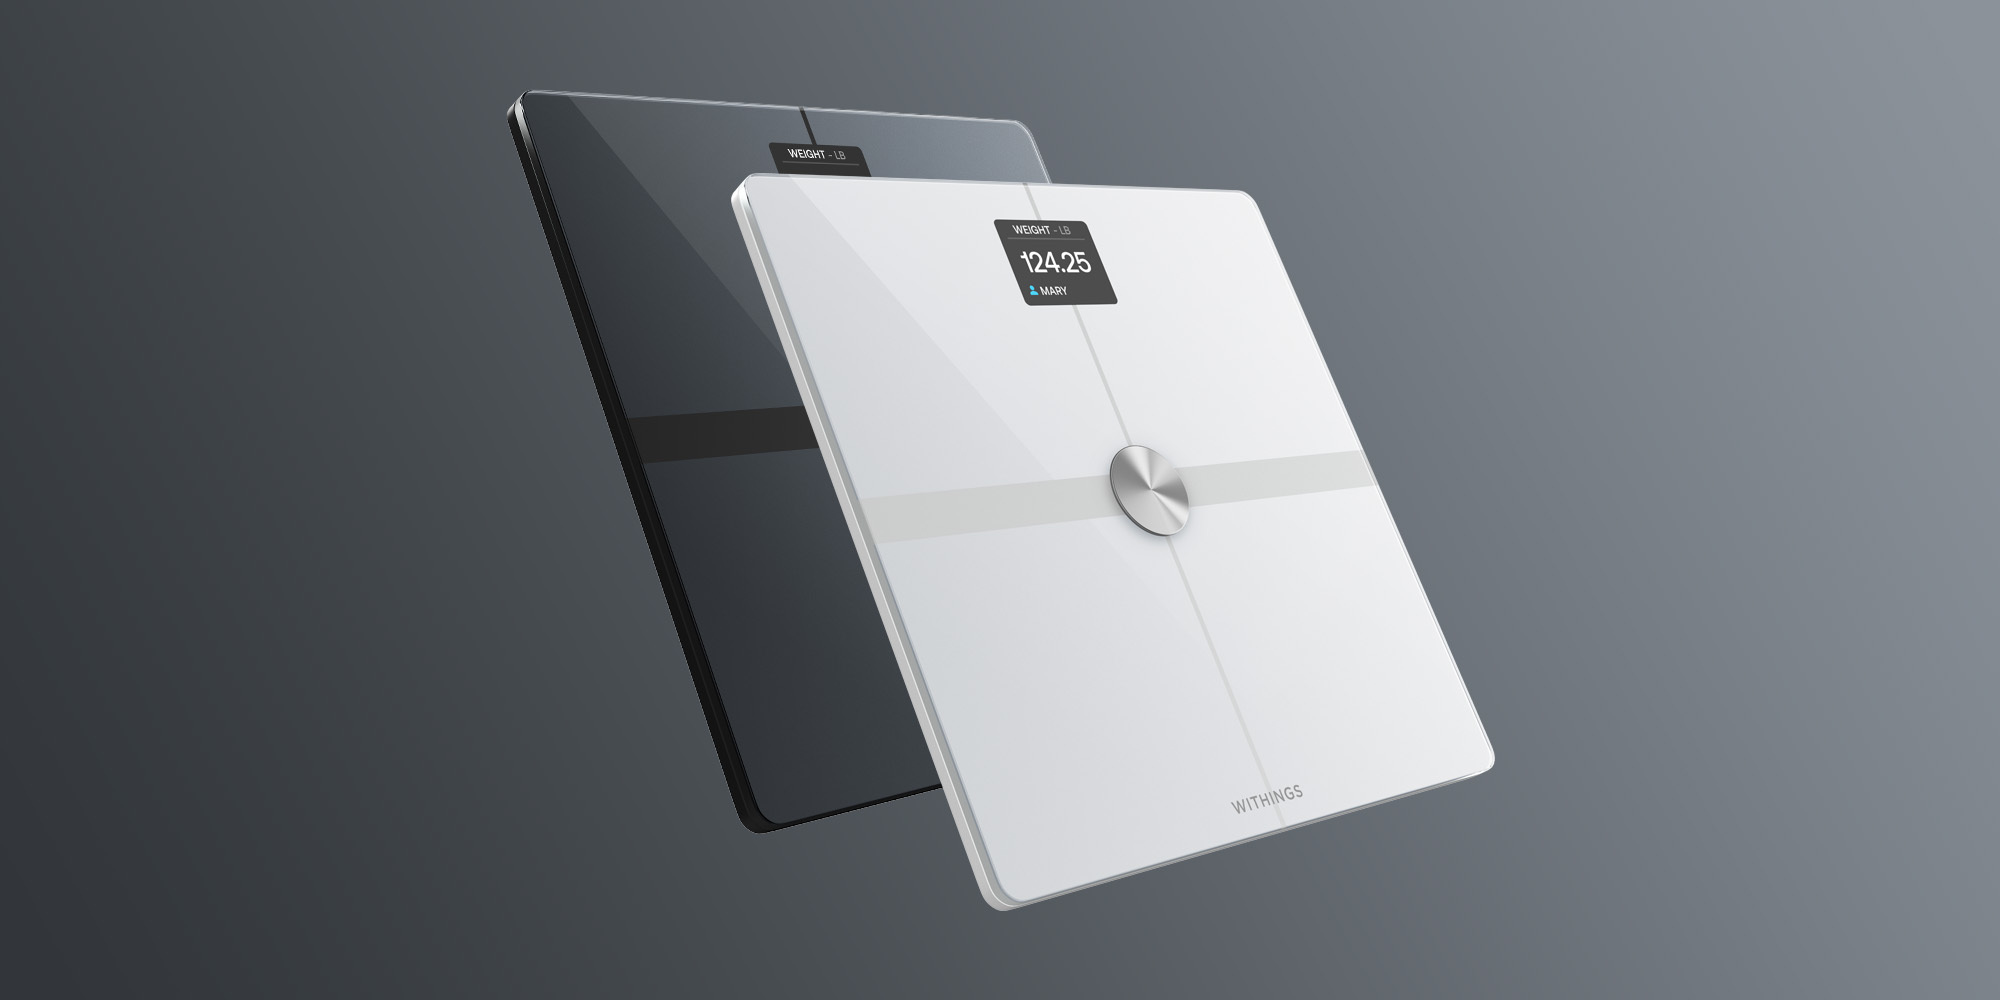 Withings' smart scale has a mode that hides your weight from you